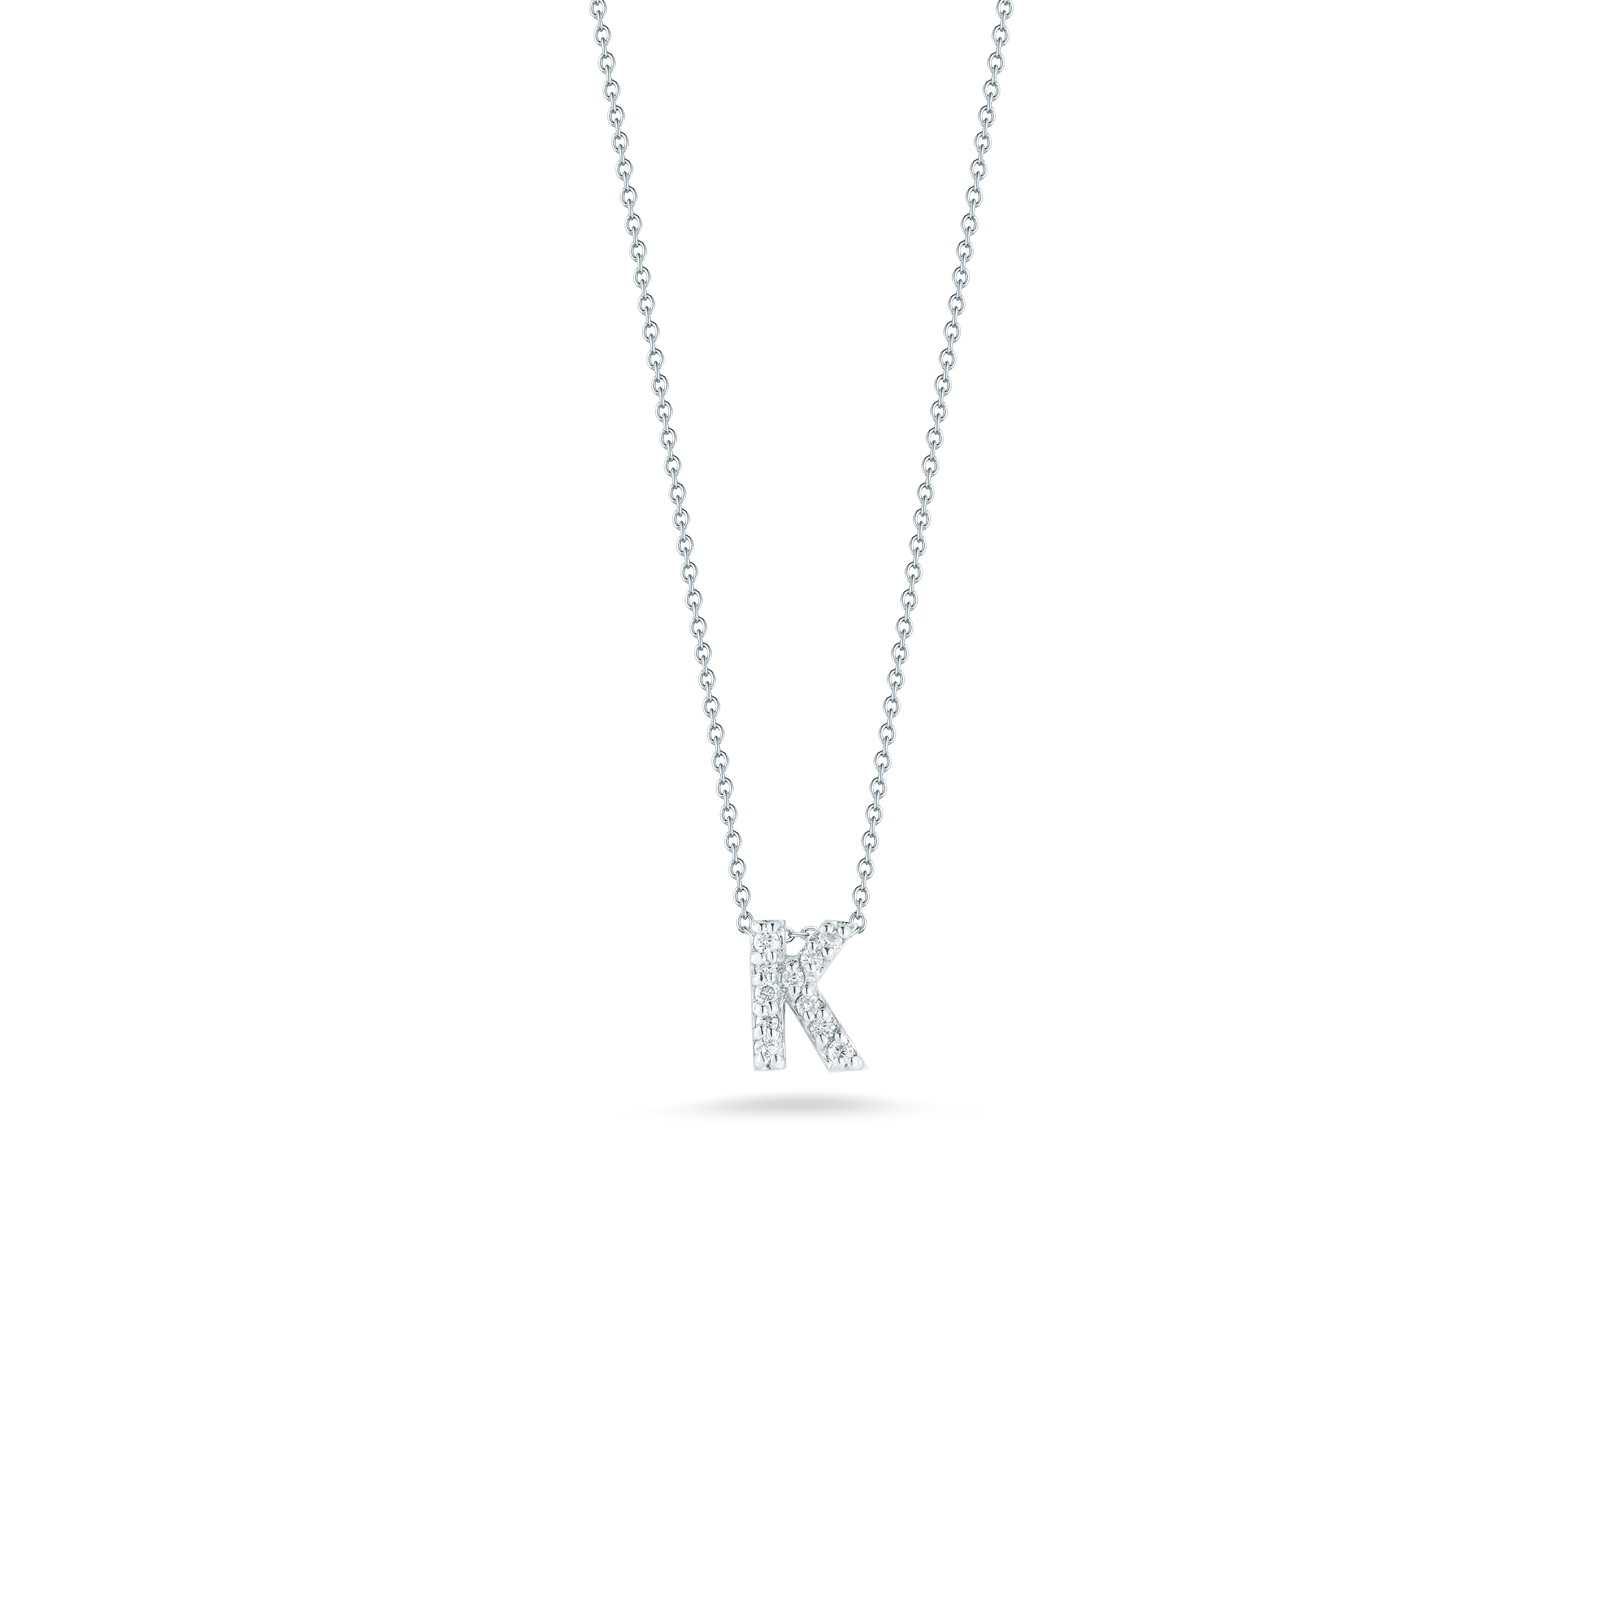 Roberto Coin 18kt White Gold Diamond 'K' Initial Necklace